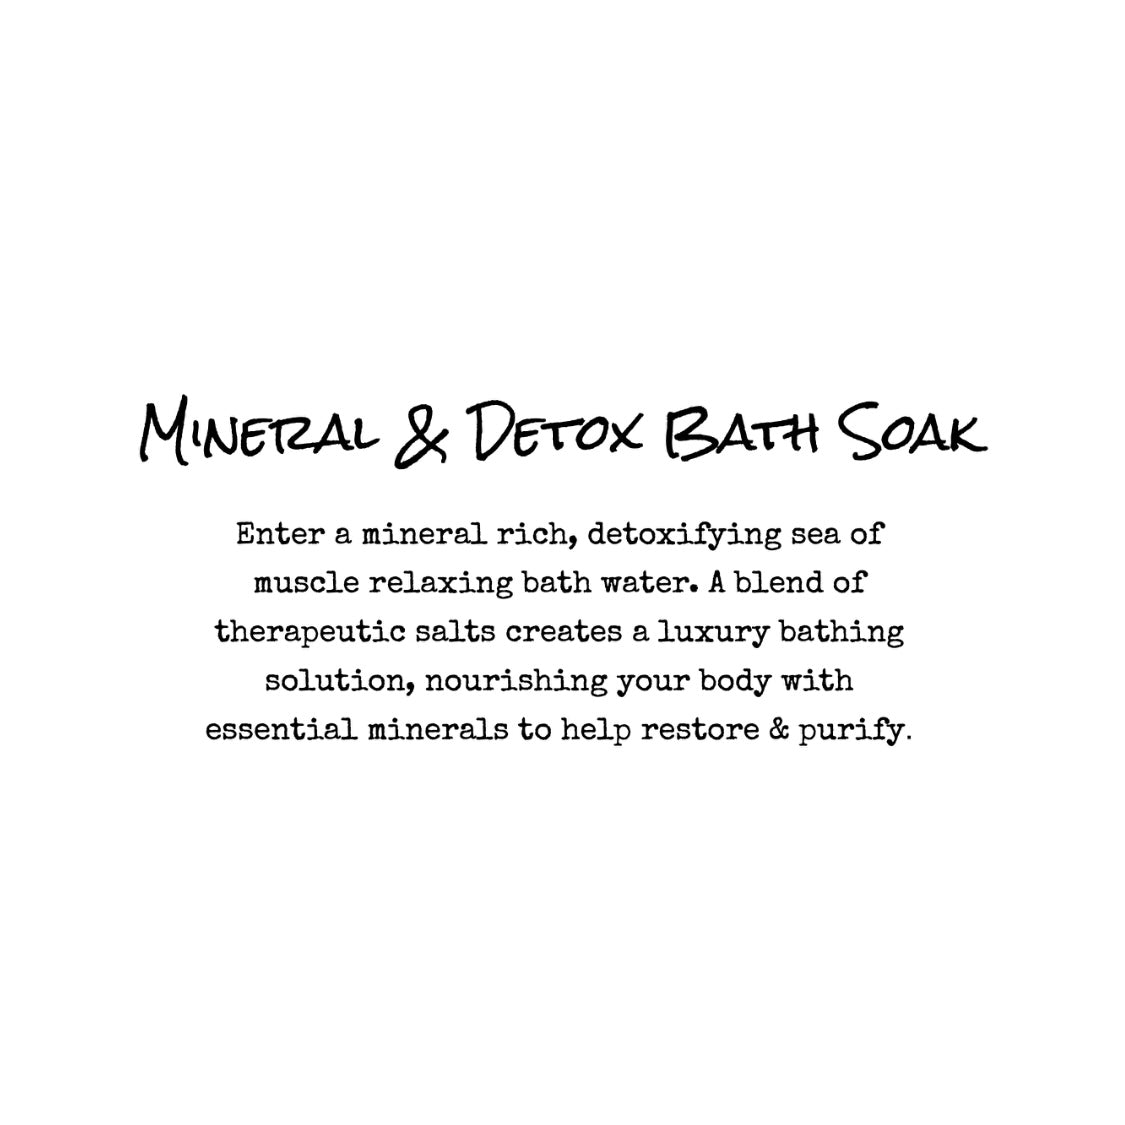 Mineral and Detox Bath Soak. Enter a mineral rich, detoxifying sea of muscle relaxing bath water. A blend of therapeutic salts creates a luxury bathing solution, nourishing your body with essential minerals to help restore & purify.